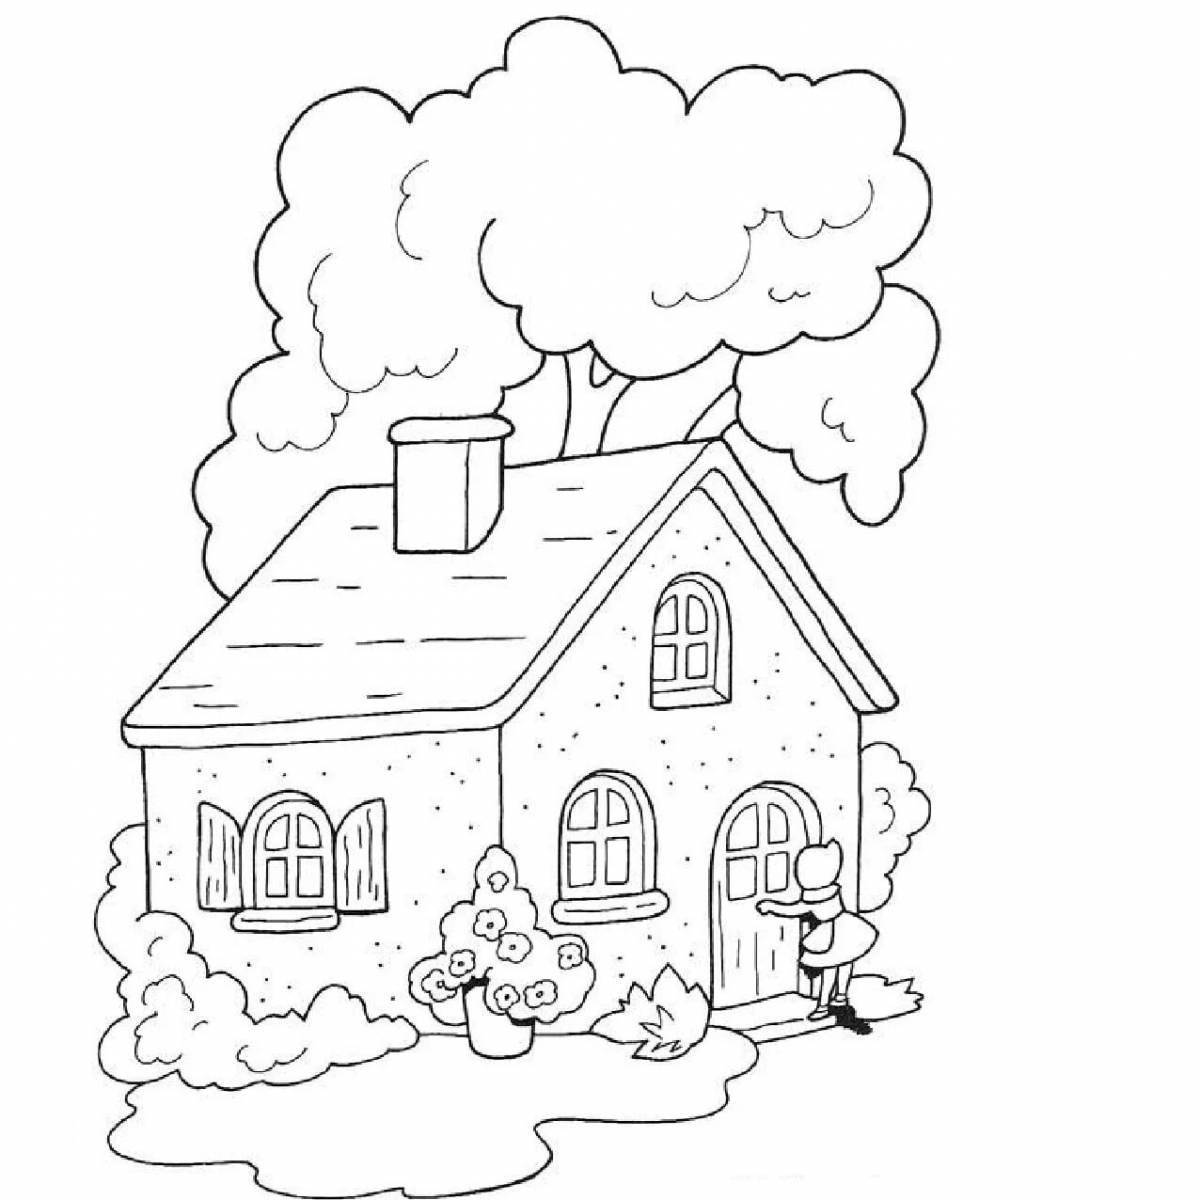 Amazing burning house coloring book for kids